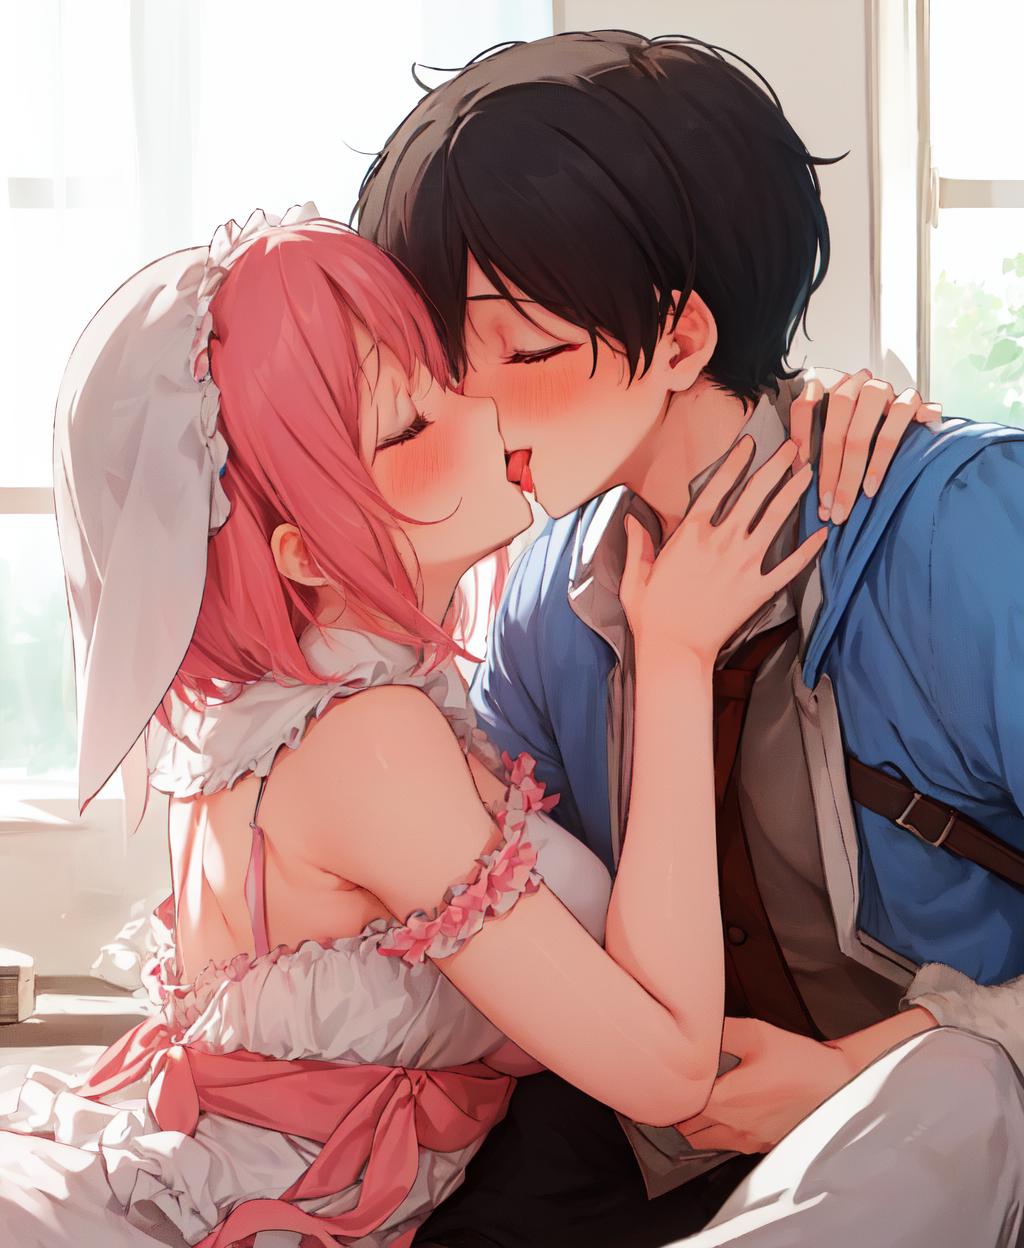 Anime Kisses image by JollyIm